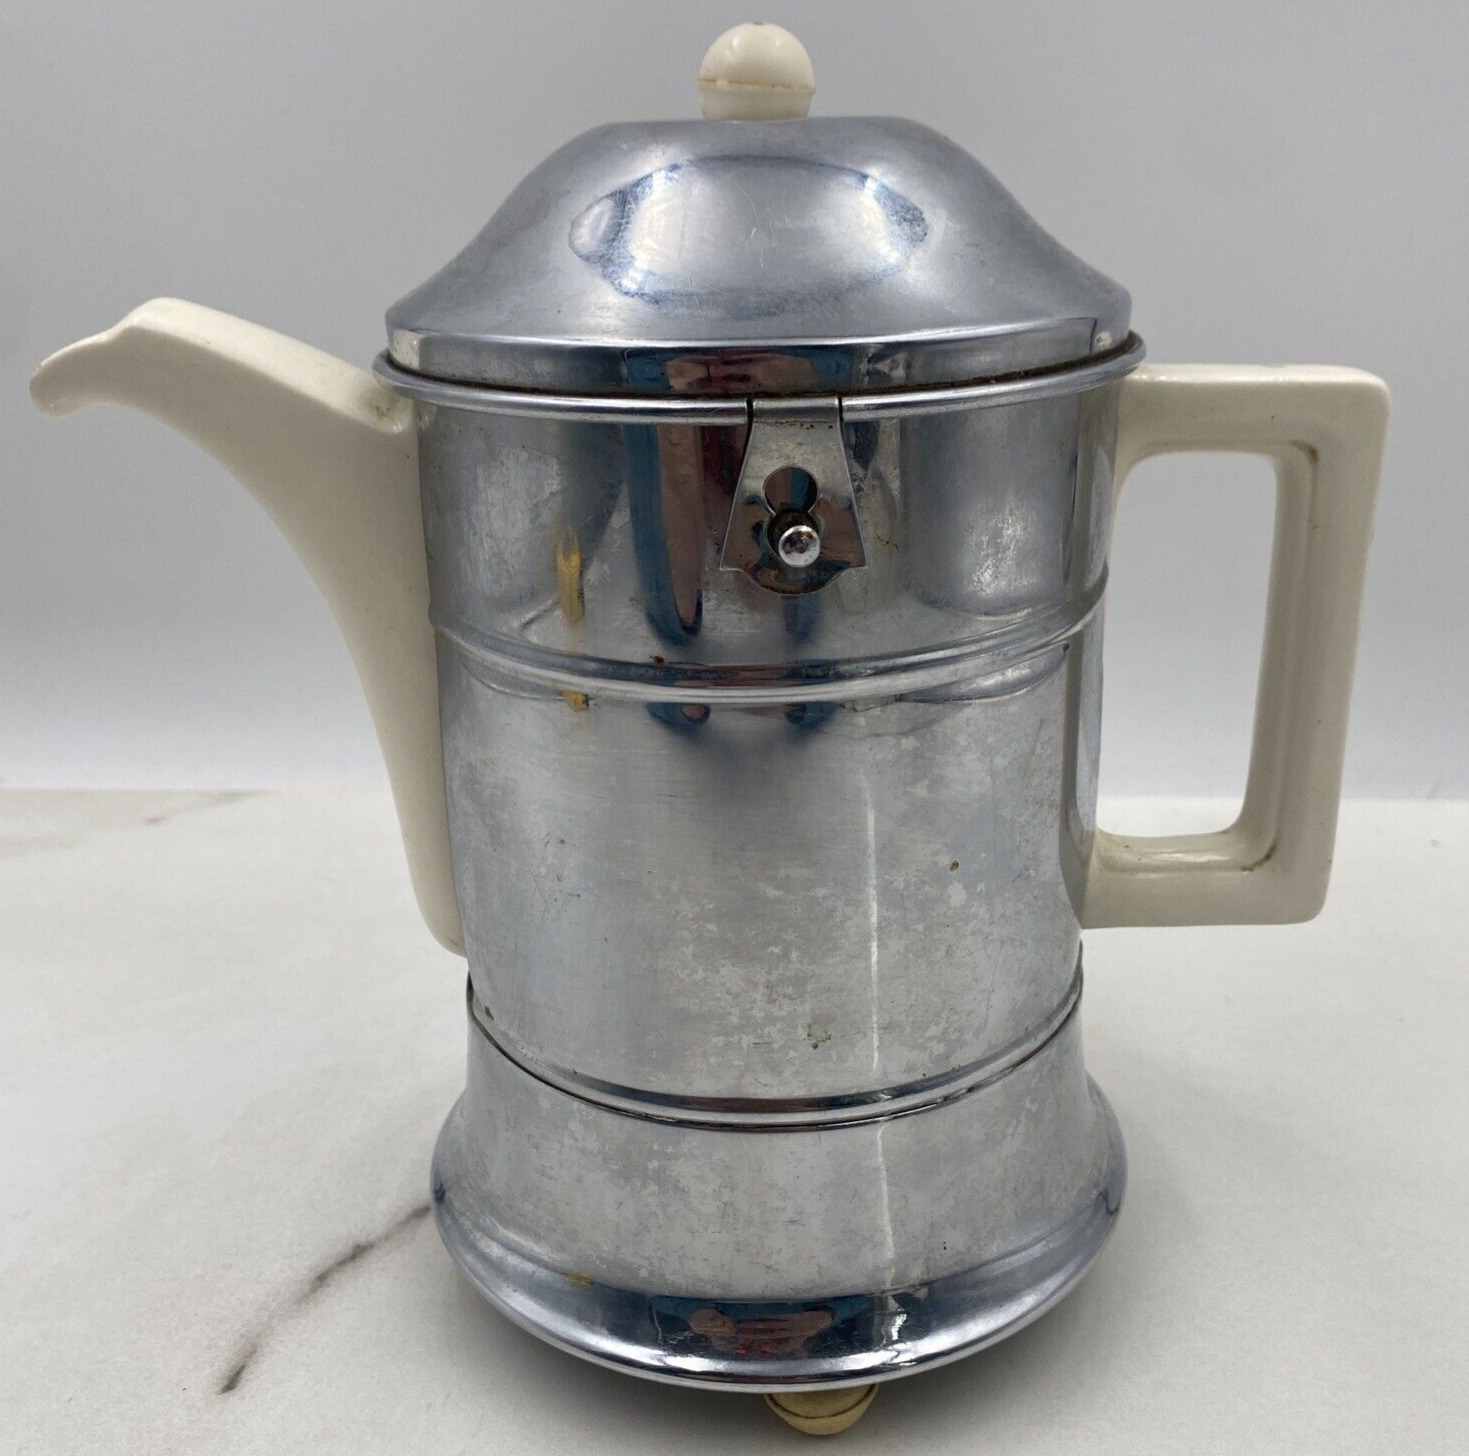 Ever-hot Teapot Insulated Vintage Made In England Ceramic Tea Pot MCM